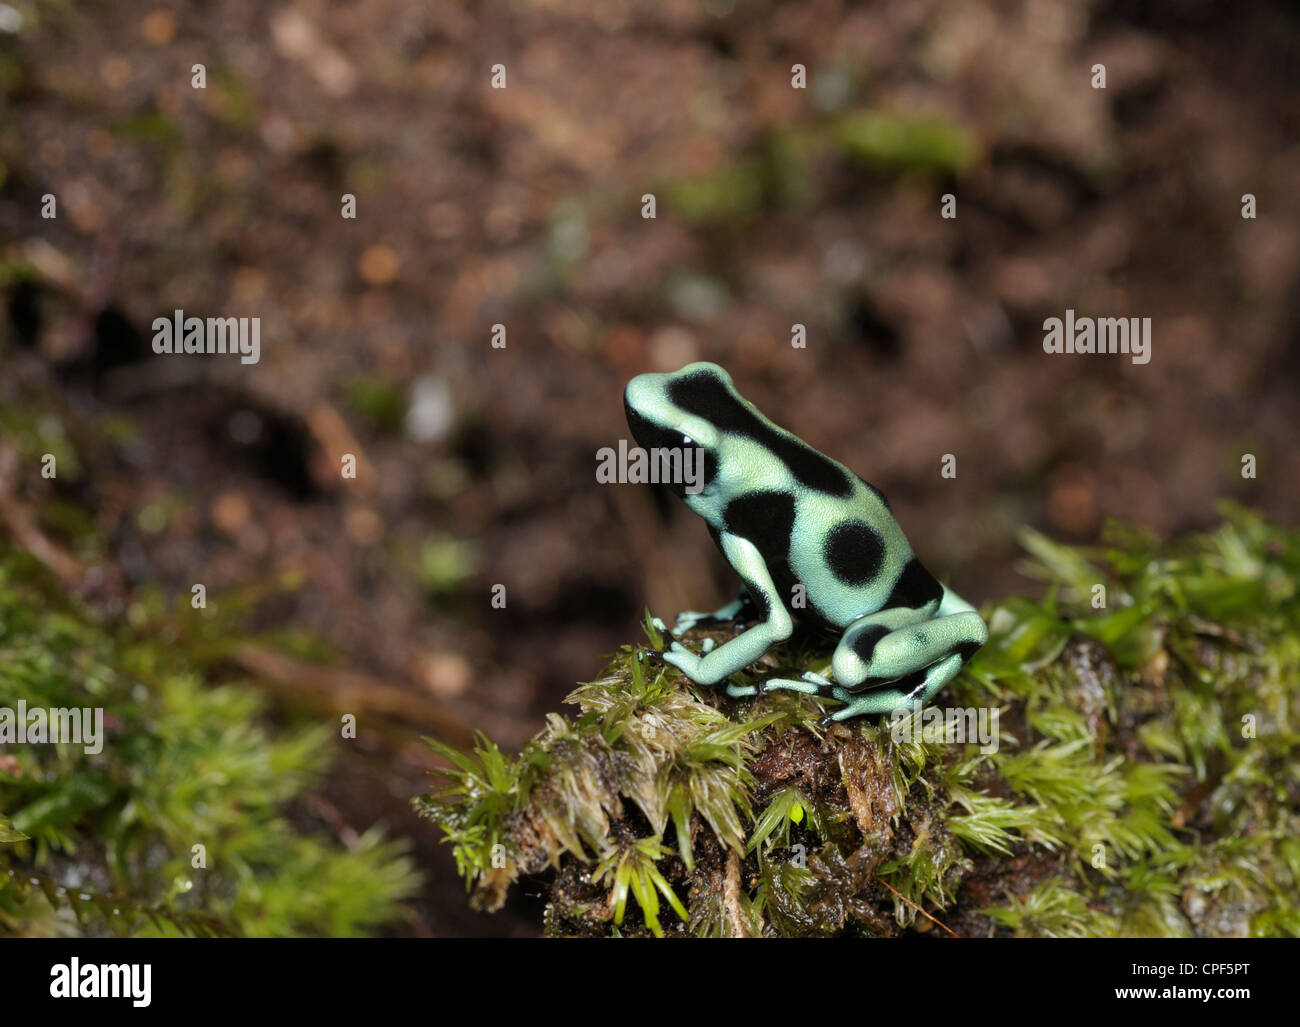 Green and Black Poison Frog, Dendrobates auratus, in rainforest, Chilamate, Costa Rica Stock Photo